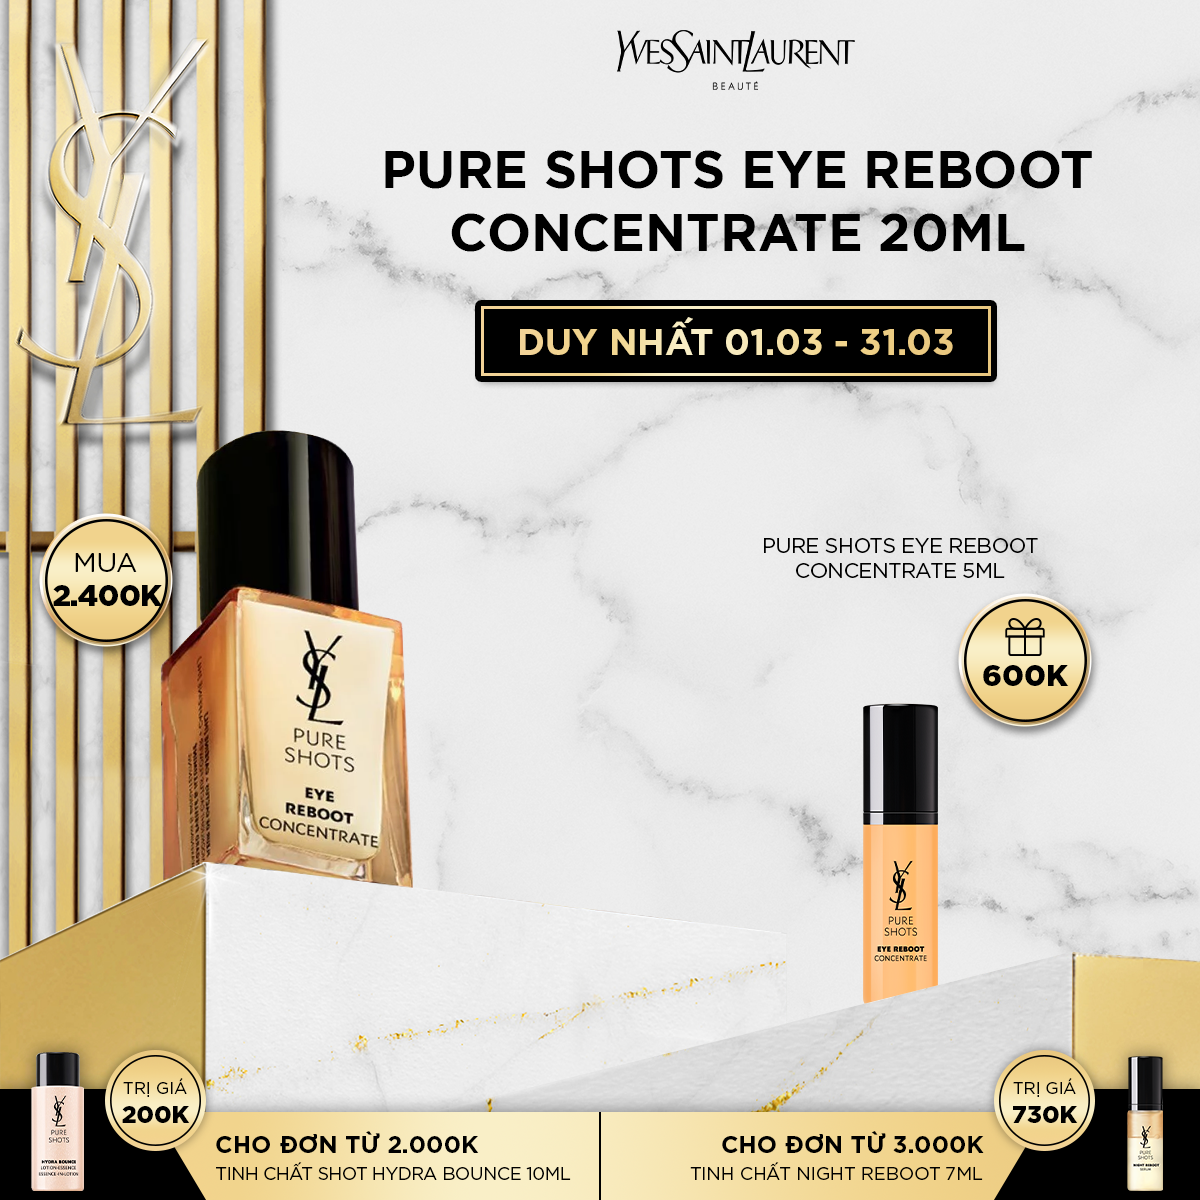 [MAR] Pure Shots Eye Reboot Concentrate 20ml